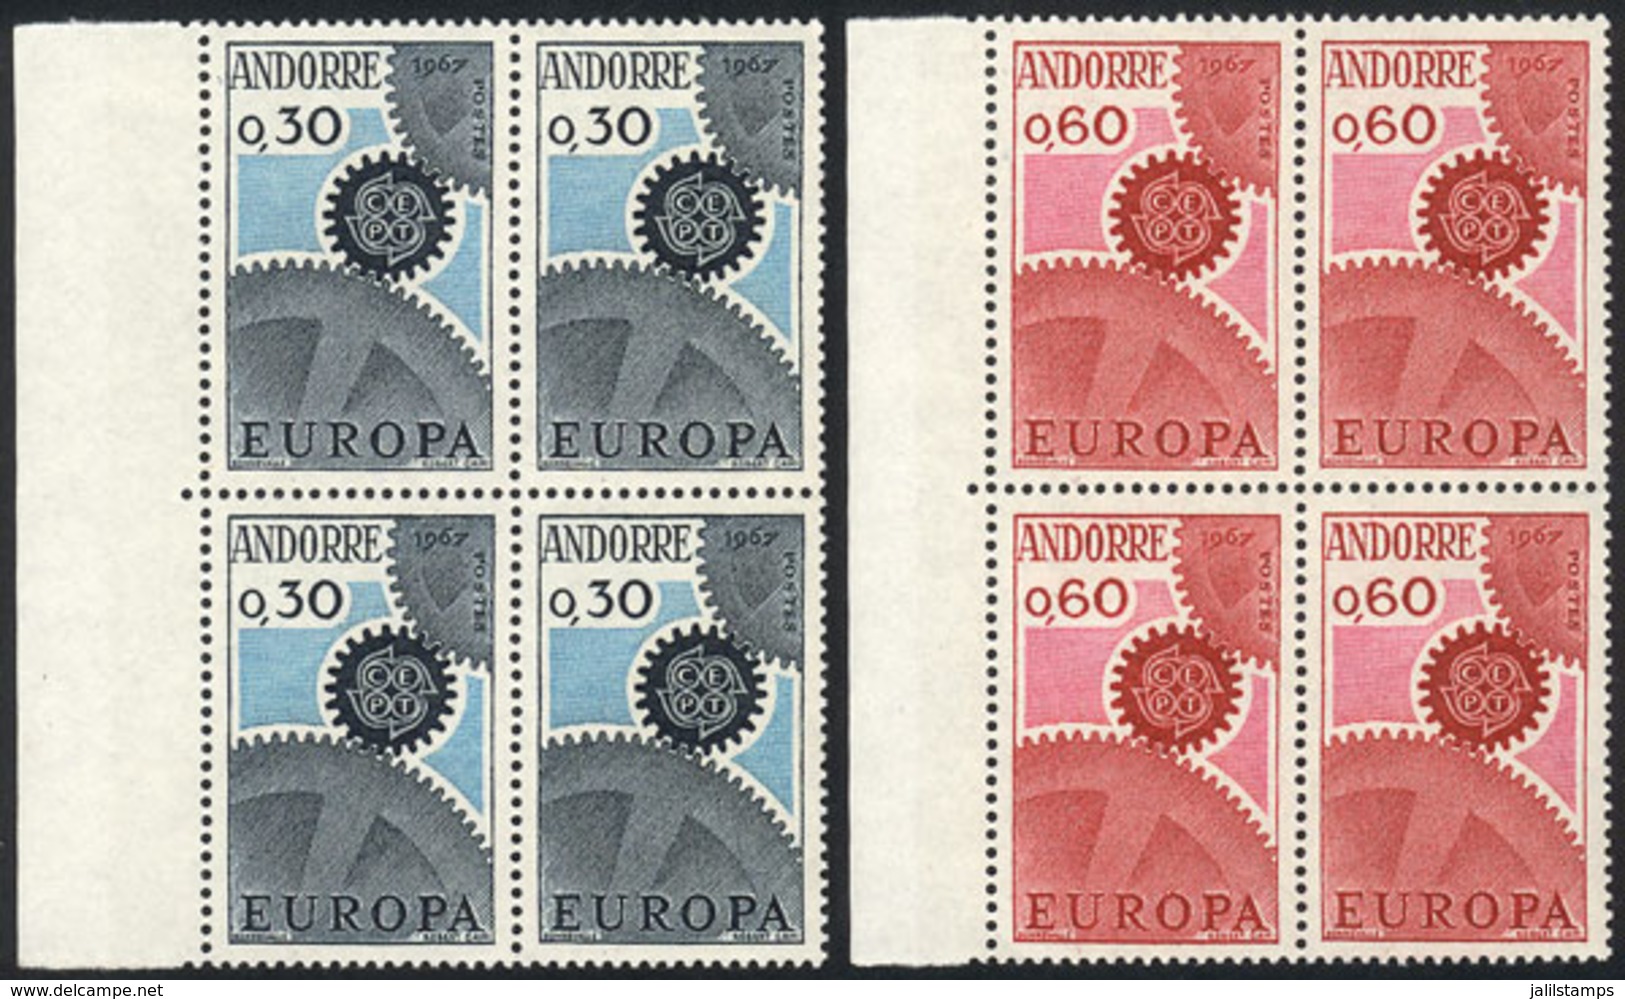 FRENCH ANDORRA: Yvert 179/180, 1967 Topic Europa, MNH Blocks Of 4, Excellent Quality, Catalog Value Euros 100. - Ungebraucht